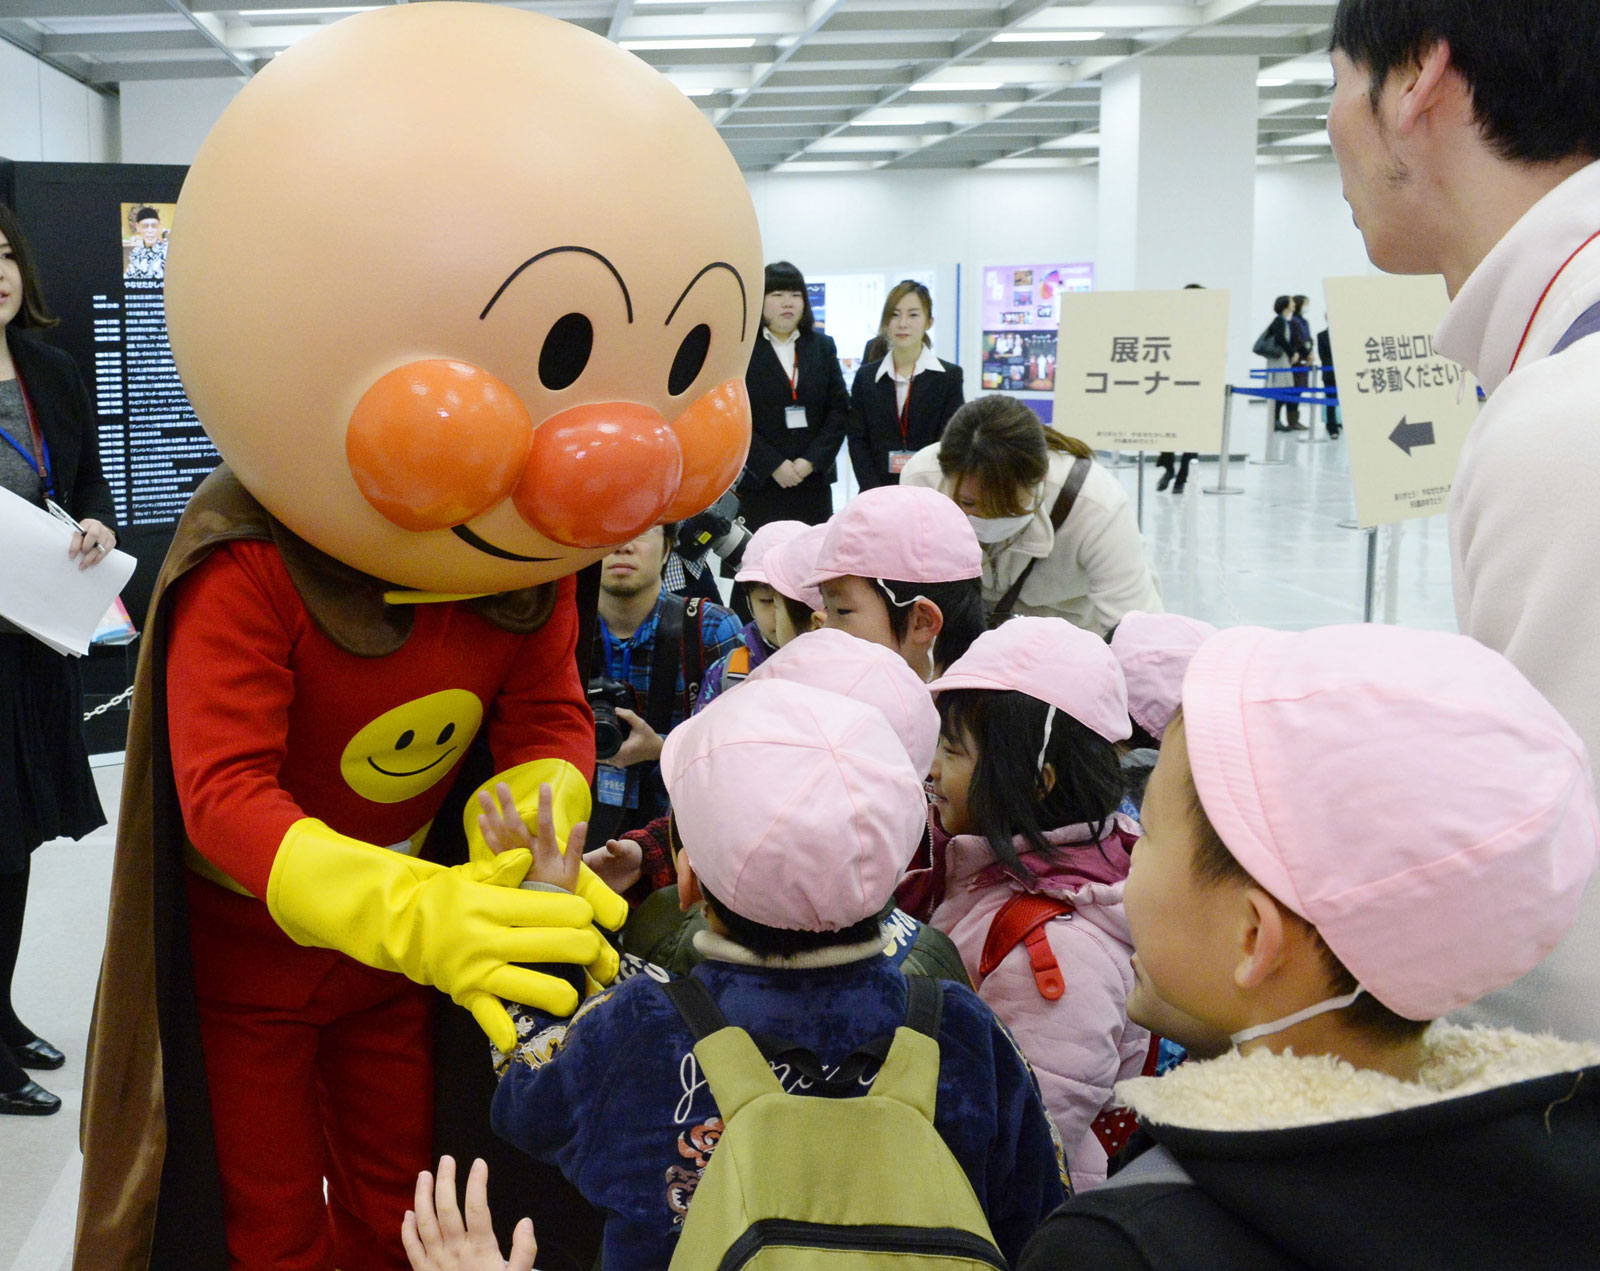 Anpanman: Is the children's superhero the best thing since sliced bread?